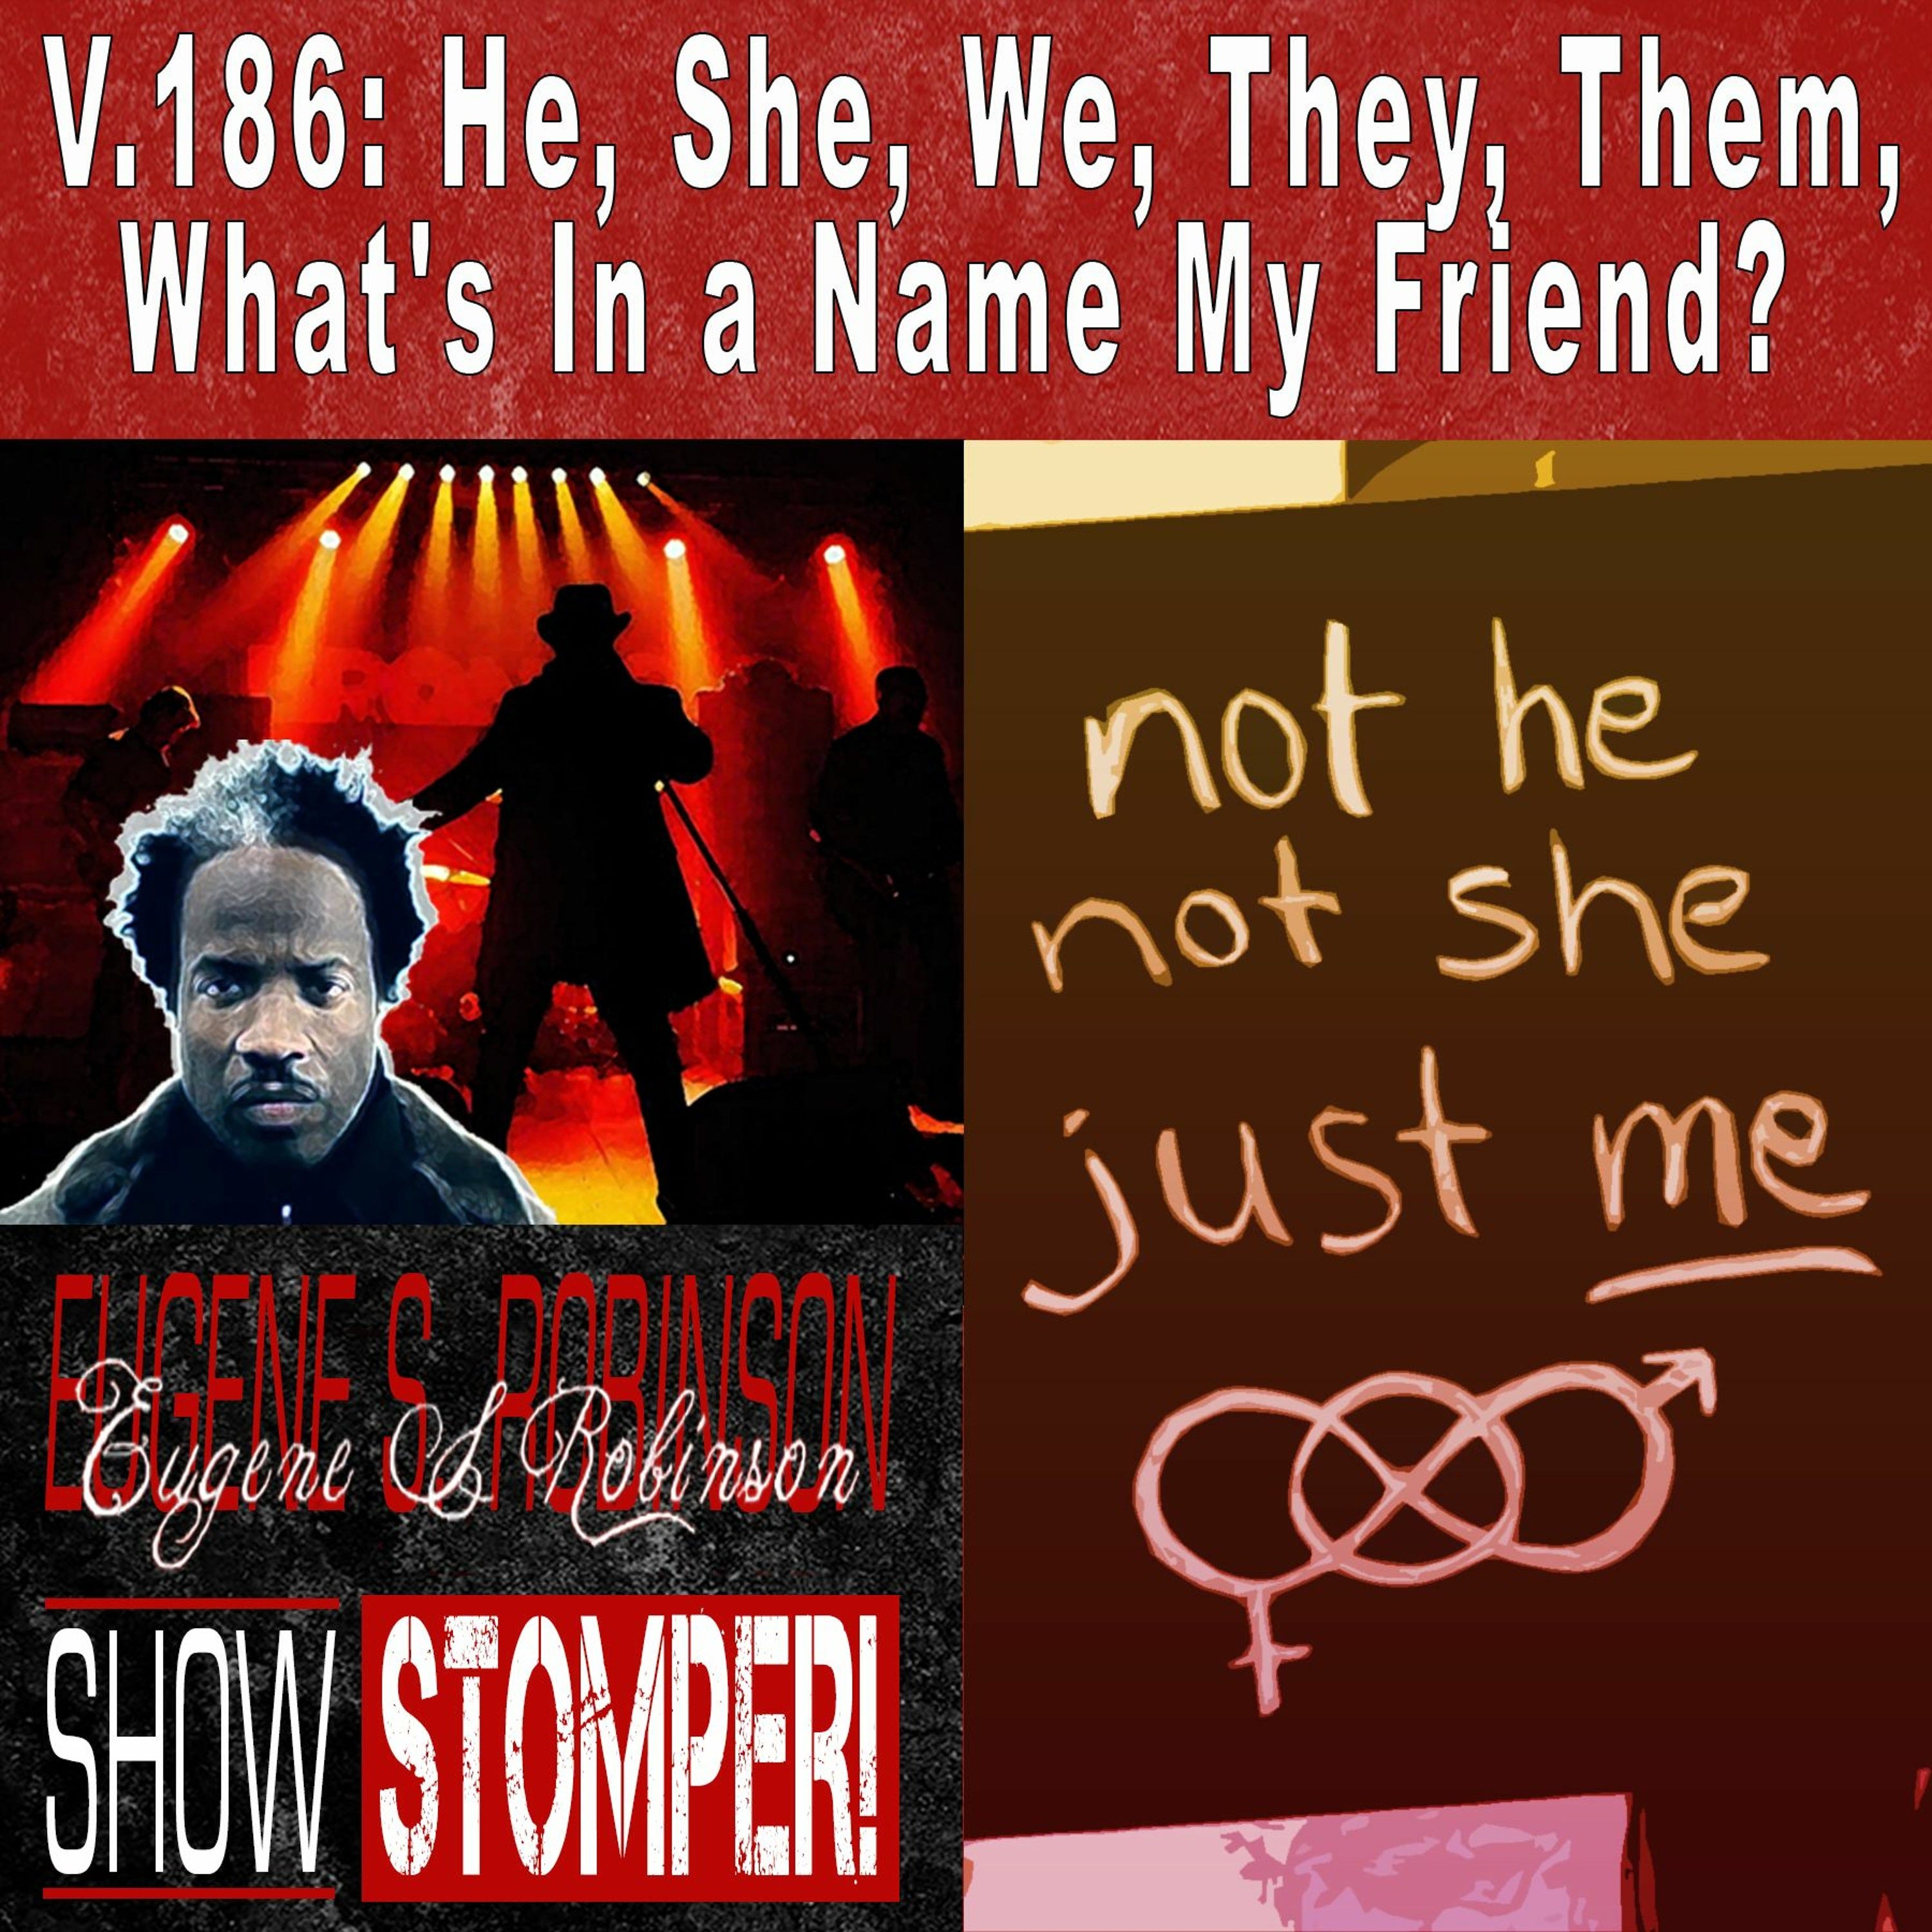 V.186 He, She, We, They, Them, What's In A Name My Friend? On The Eugene S. Robinson Show Stomper!